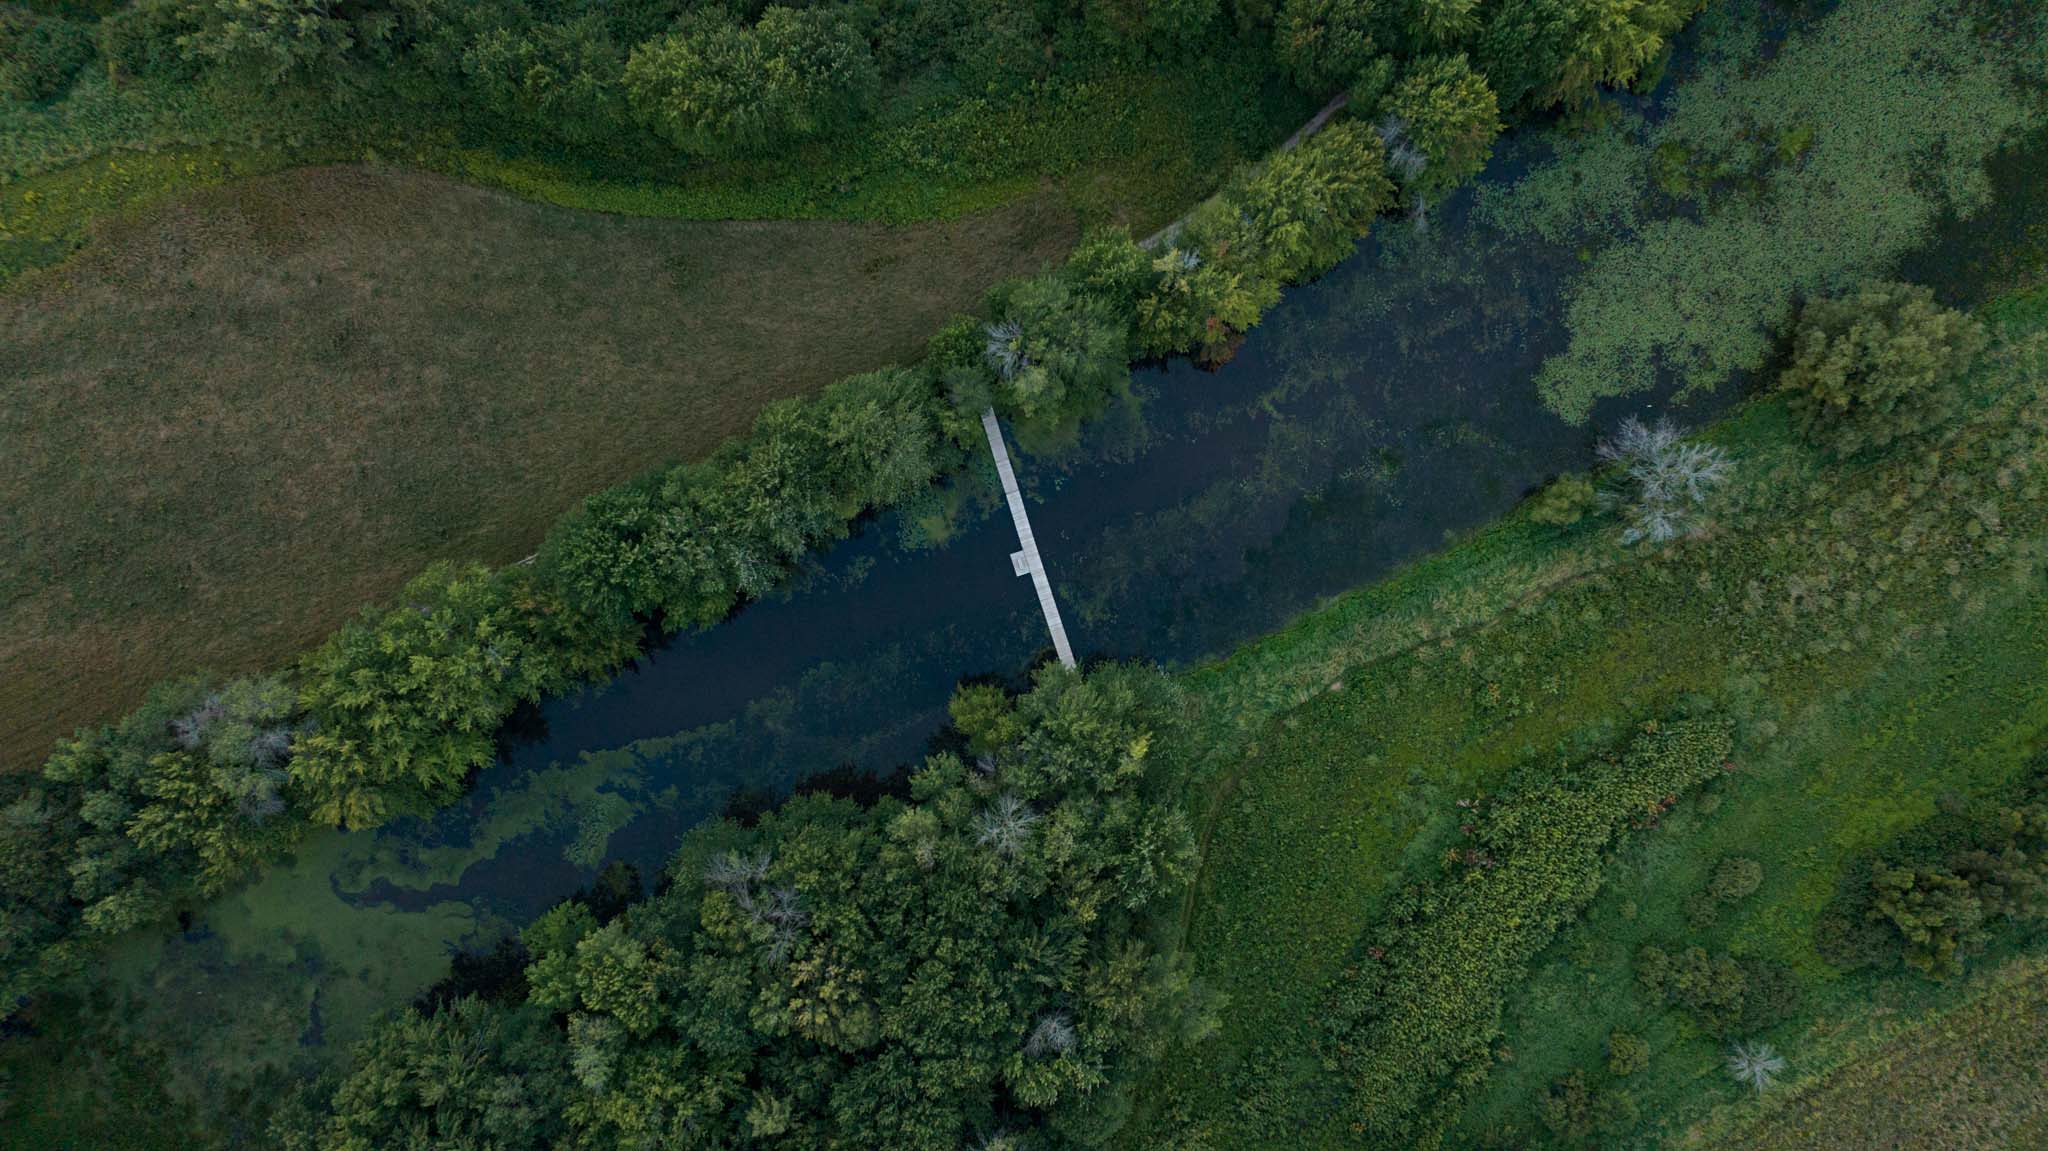 Aerial view of green land with a waterway cutting across diagonally, spanned by a bridge